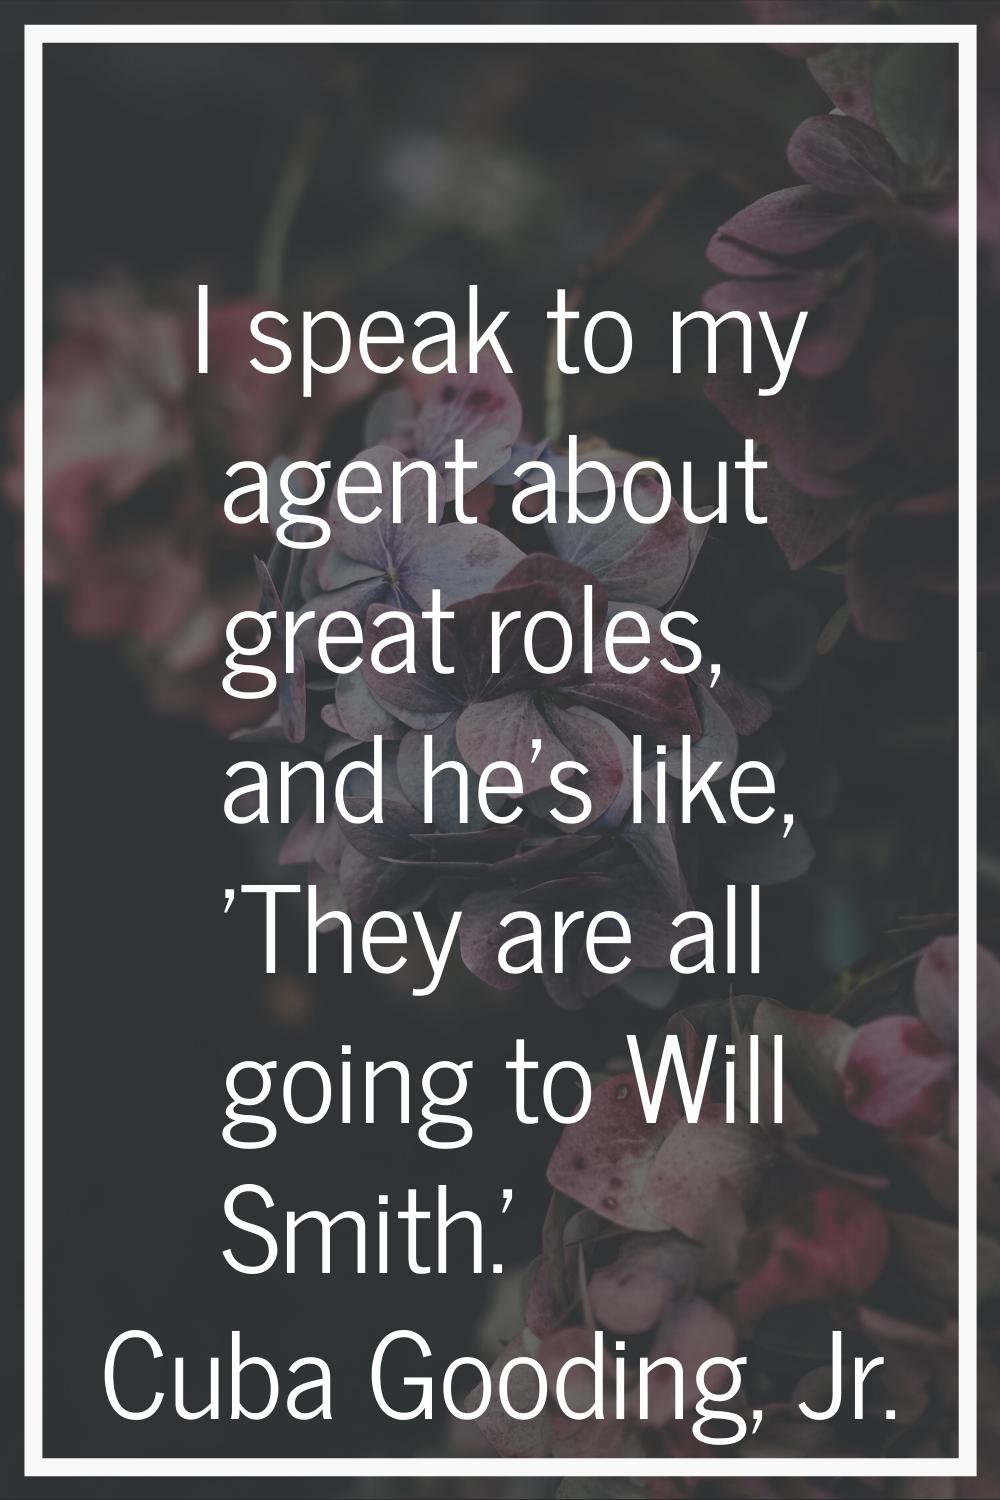 I speak to my agent about great roles, and he's like, 'They are all going to Will Smith.'